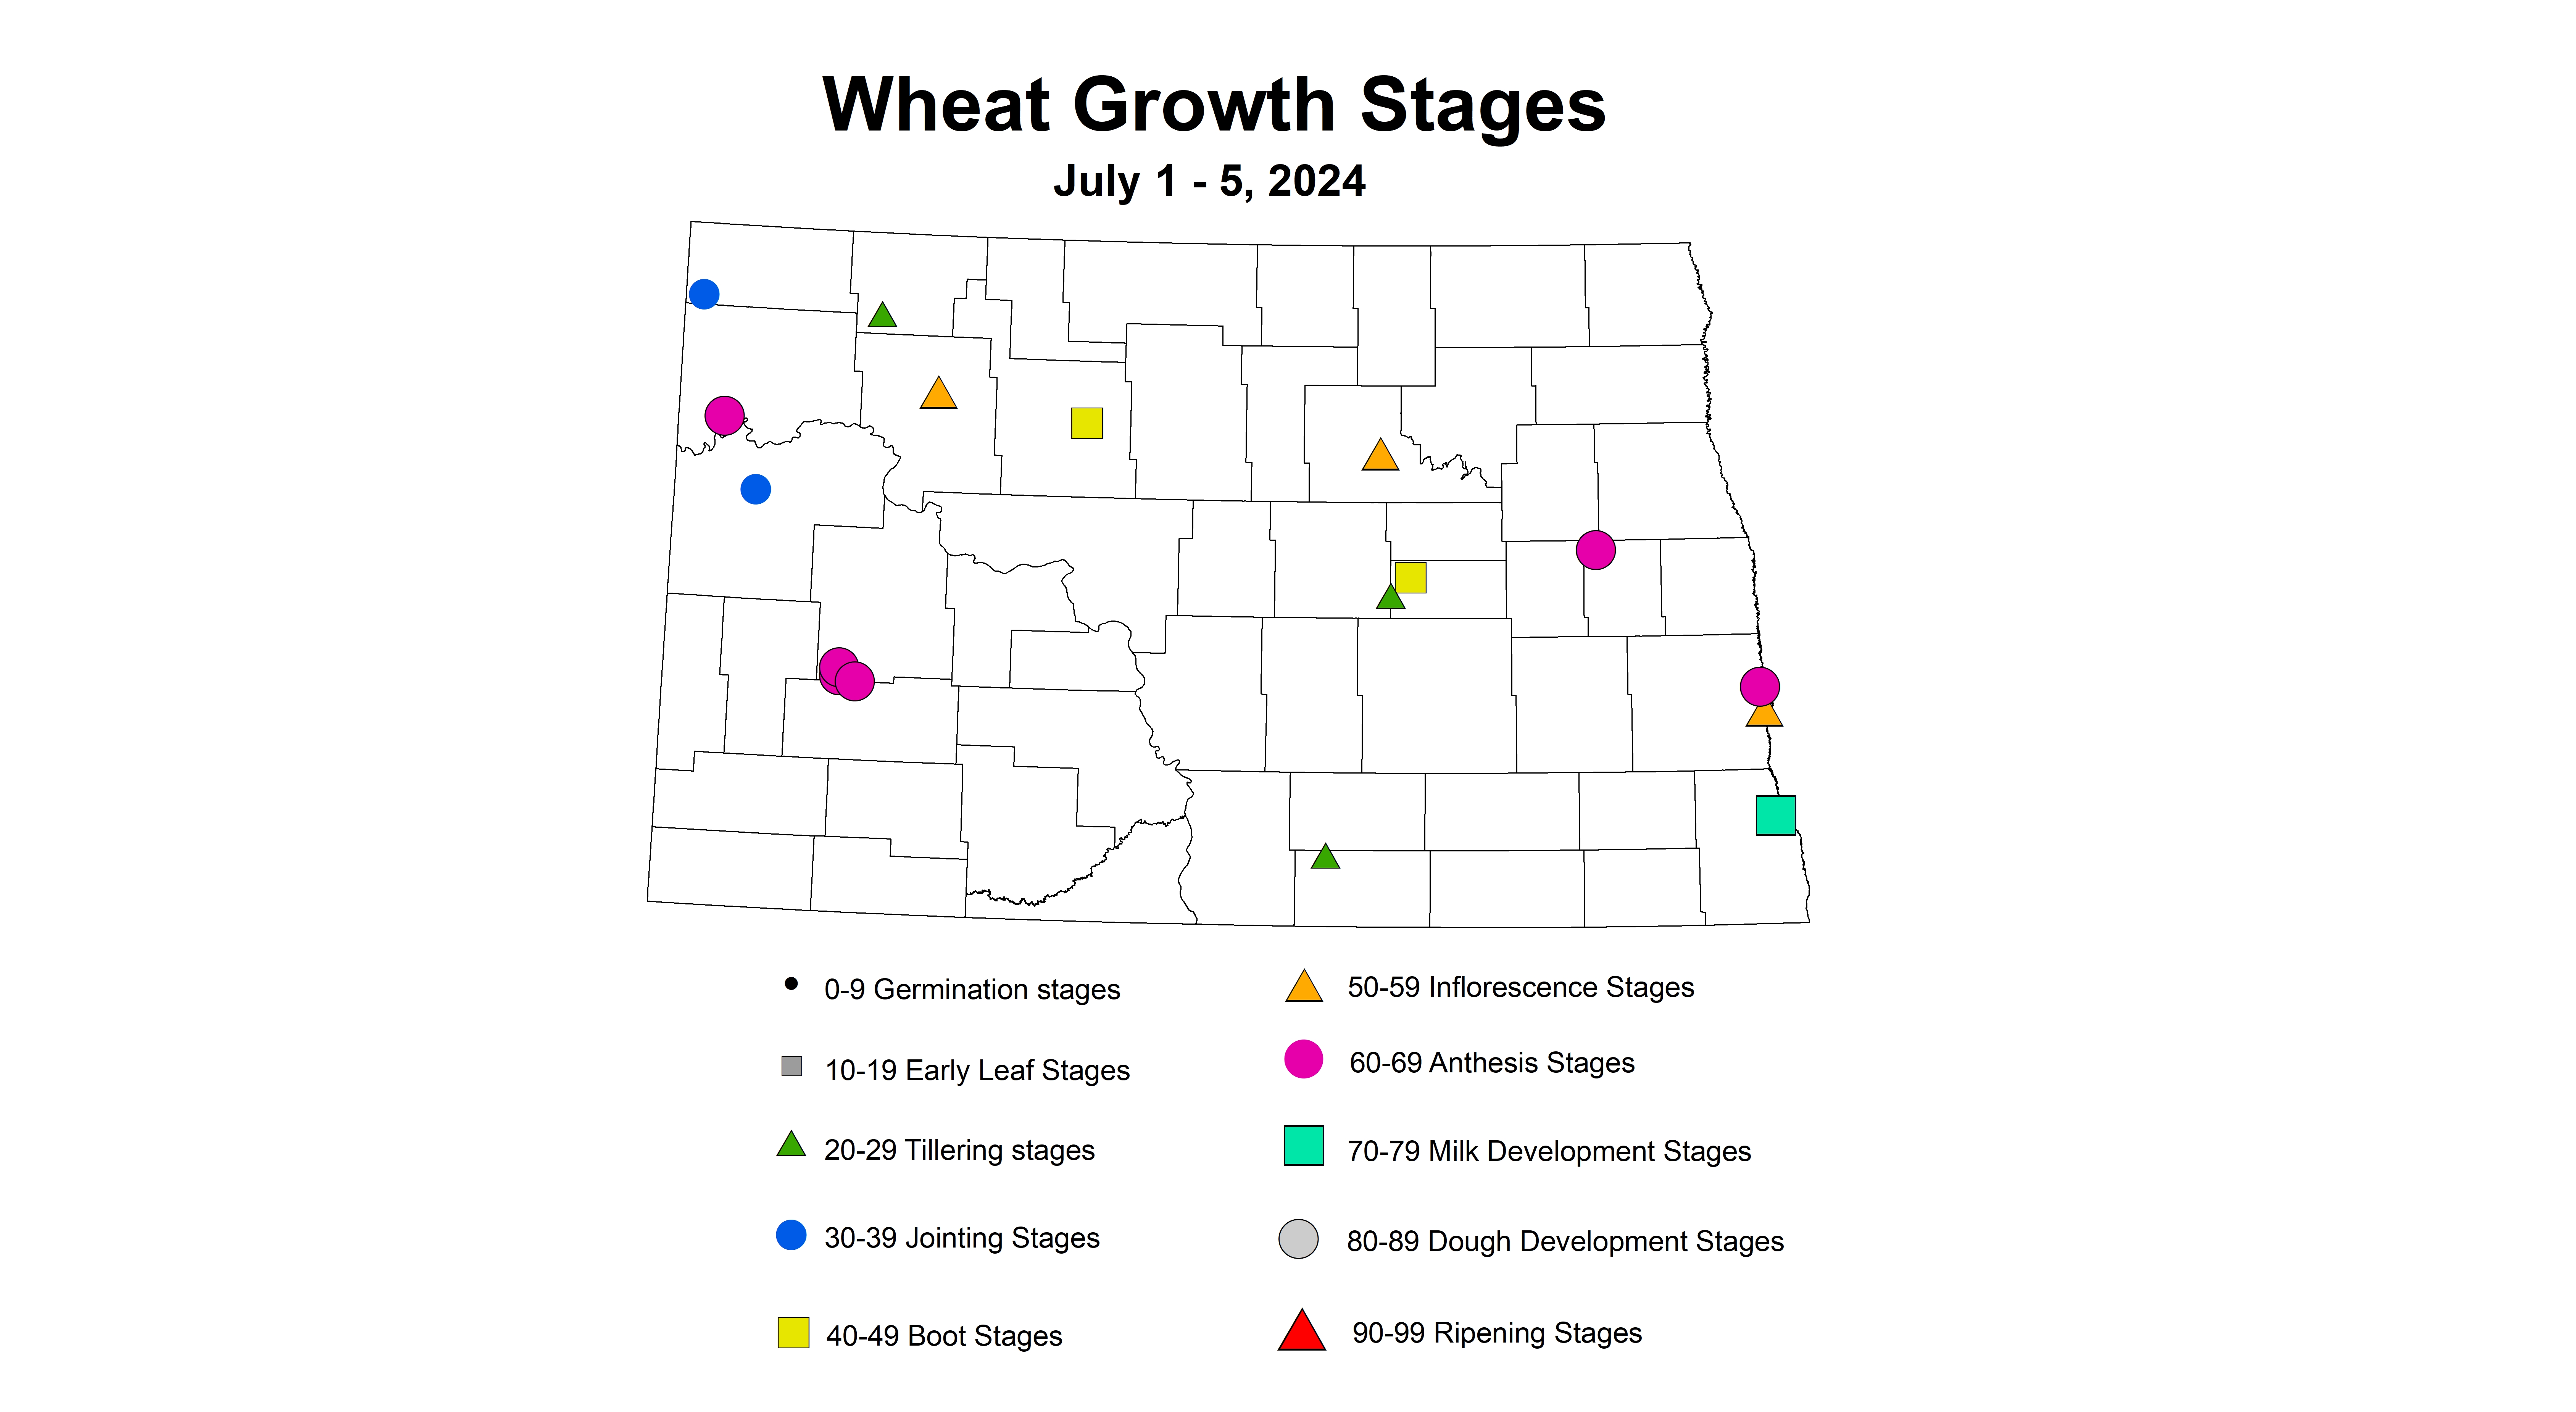 wheat growth stages 7.1-7.5 2024